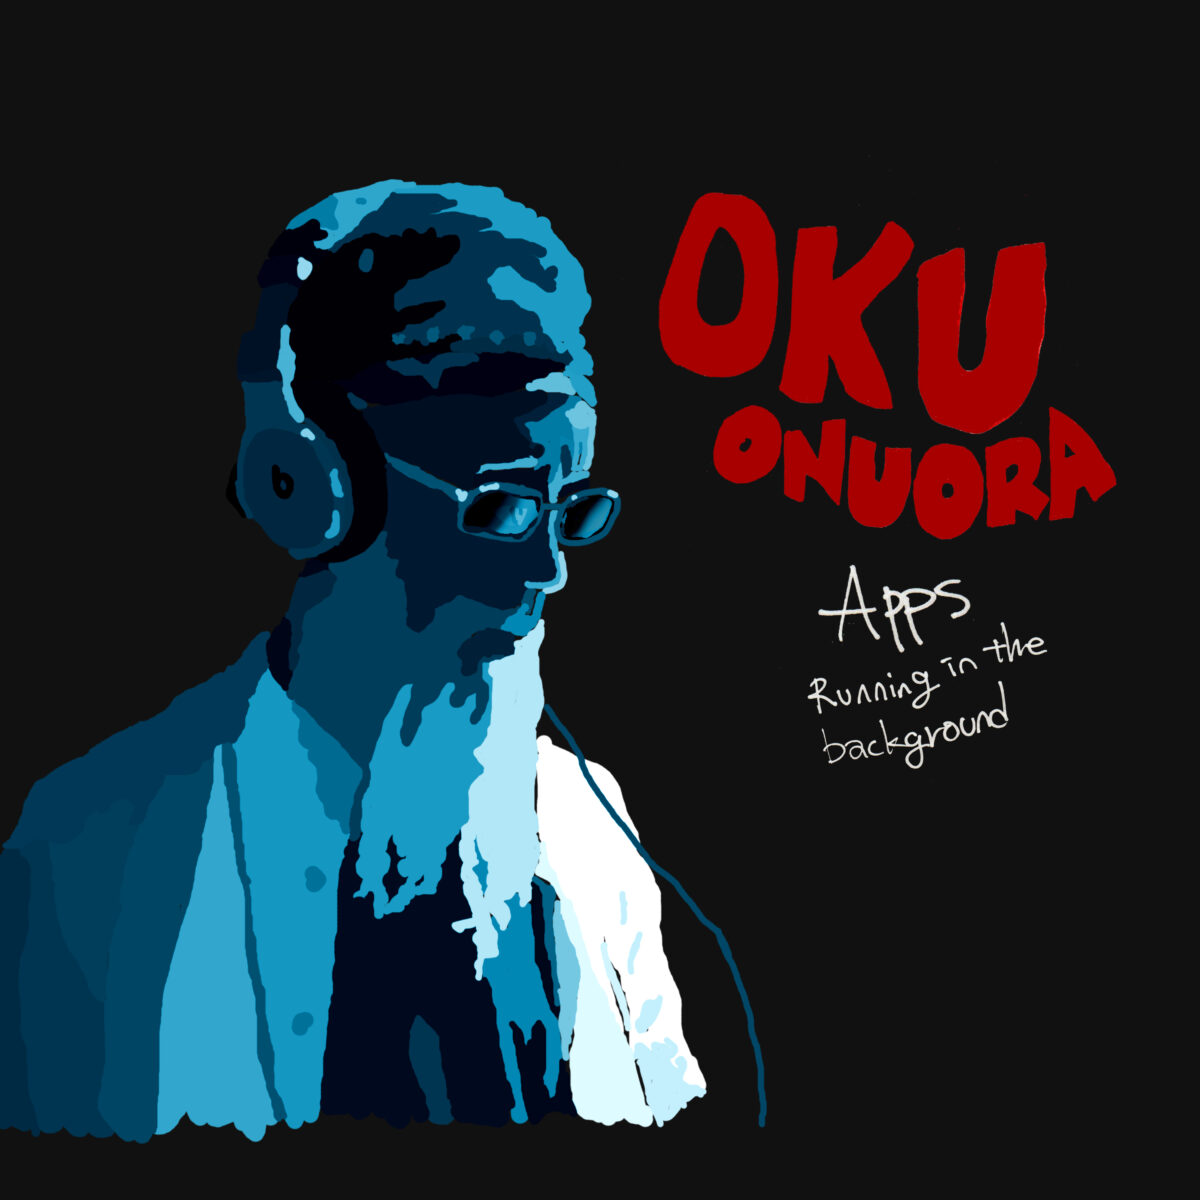 Oku Onuora - Apps (Running In The Background)